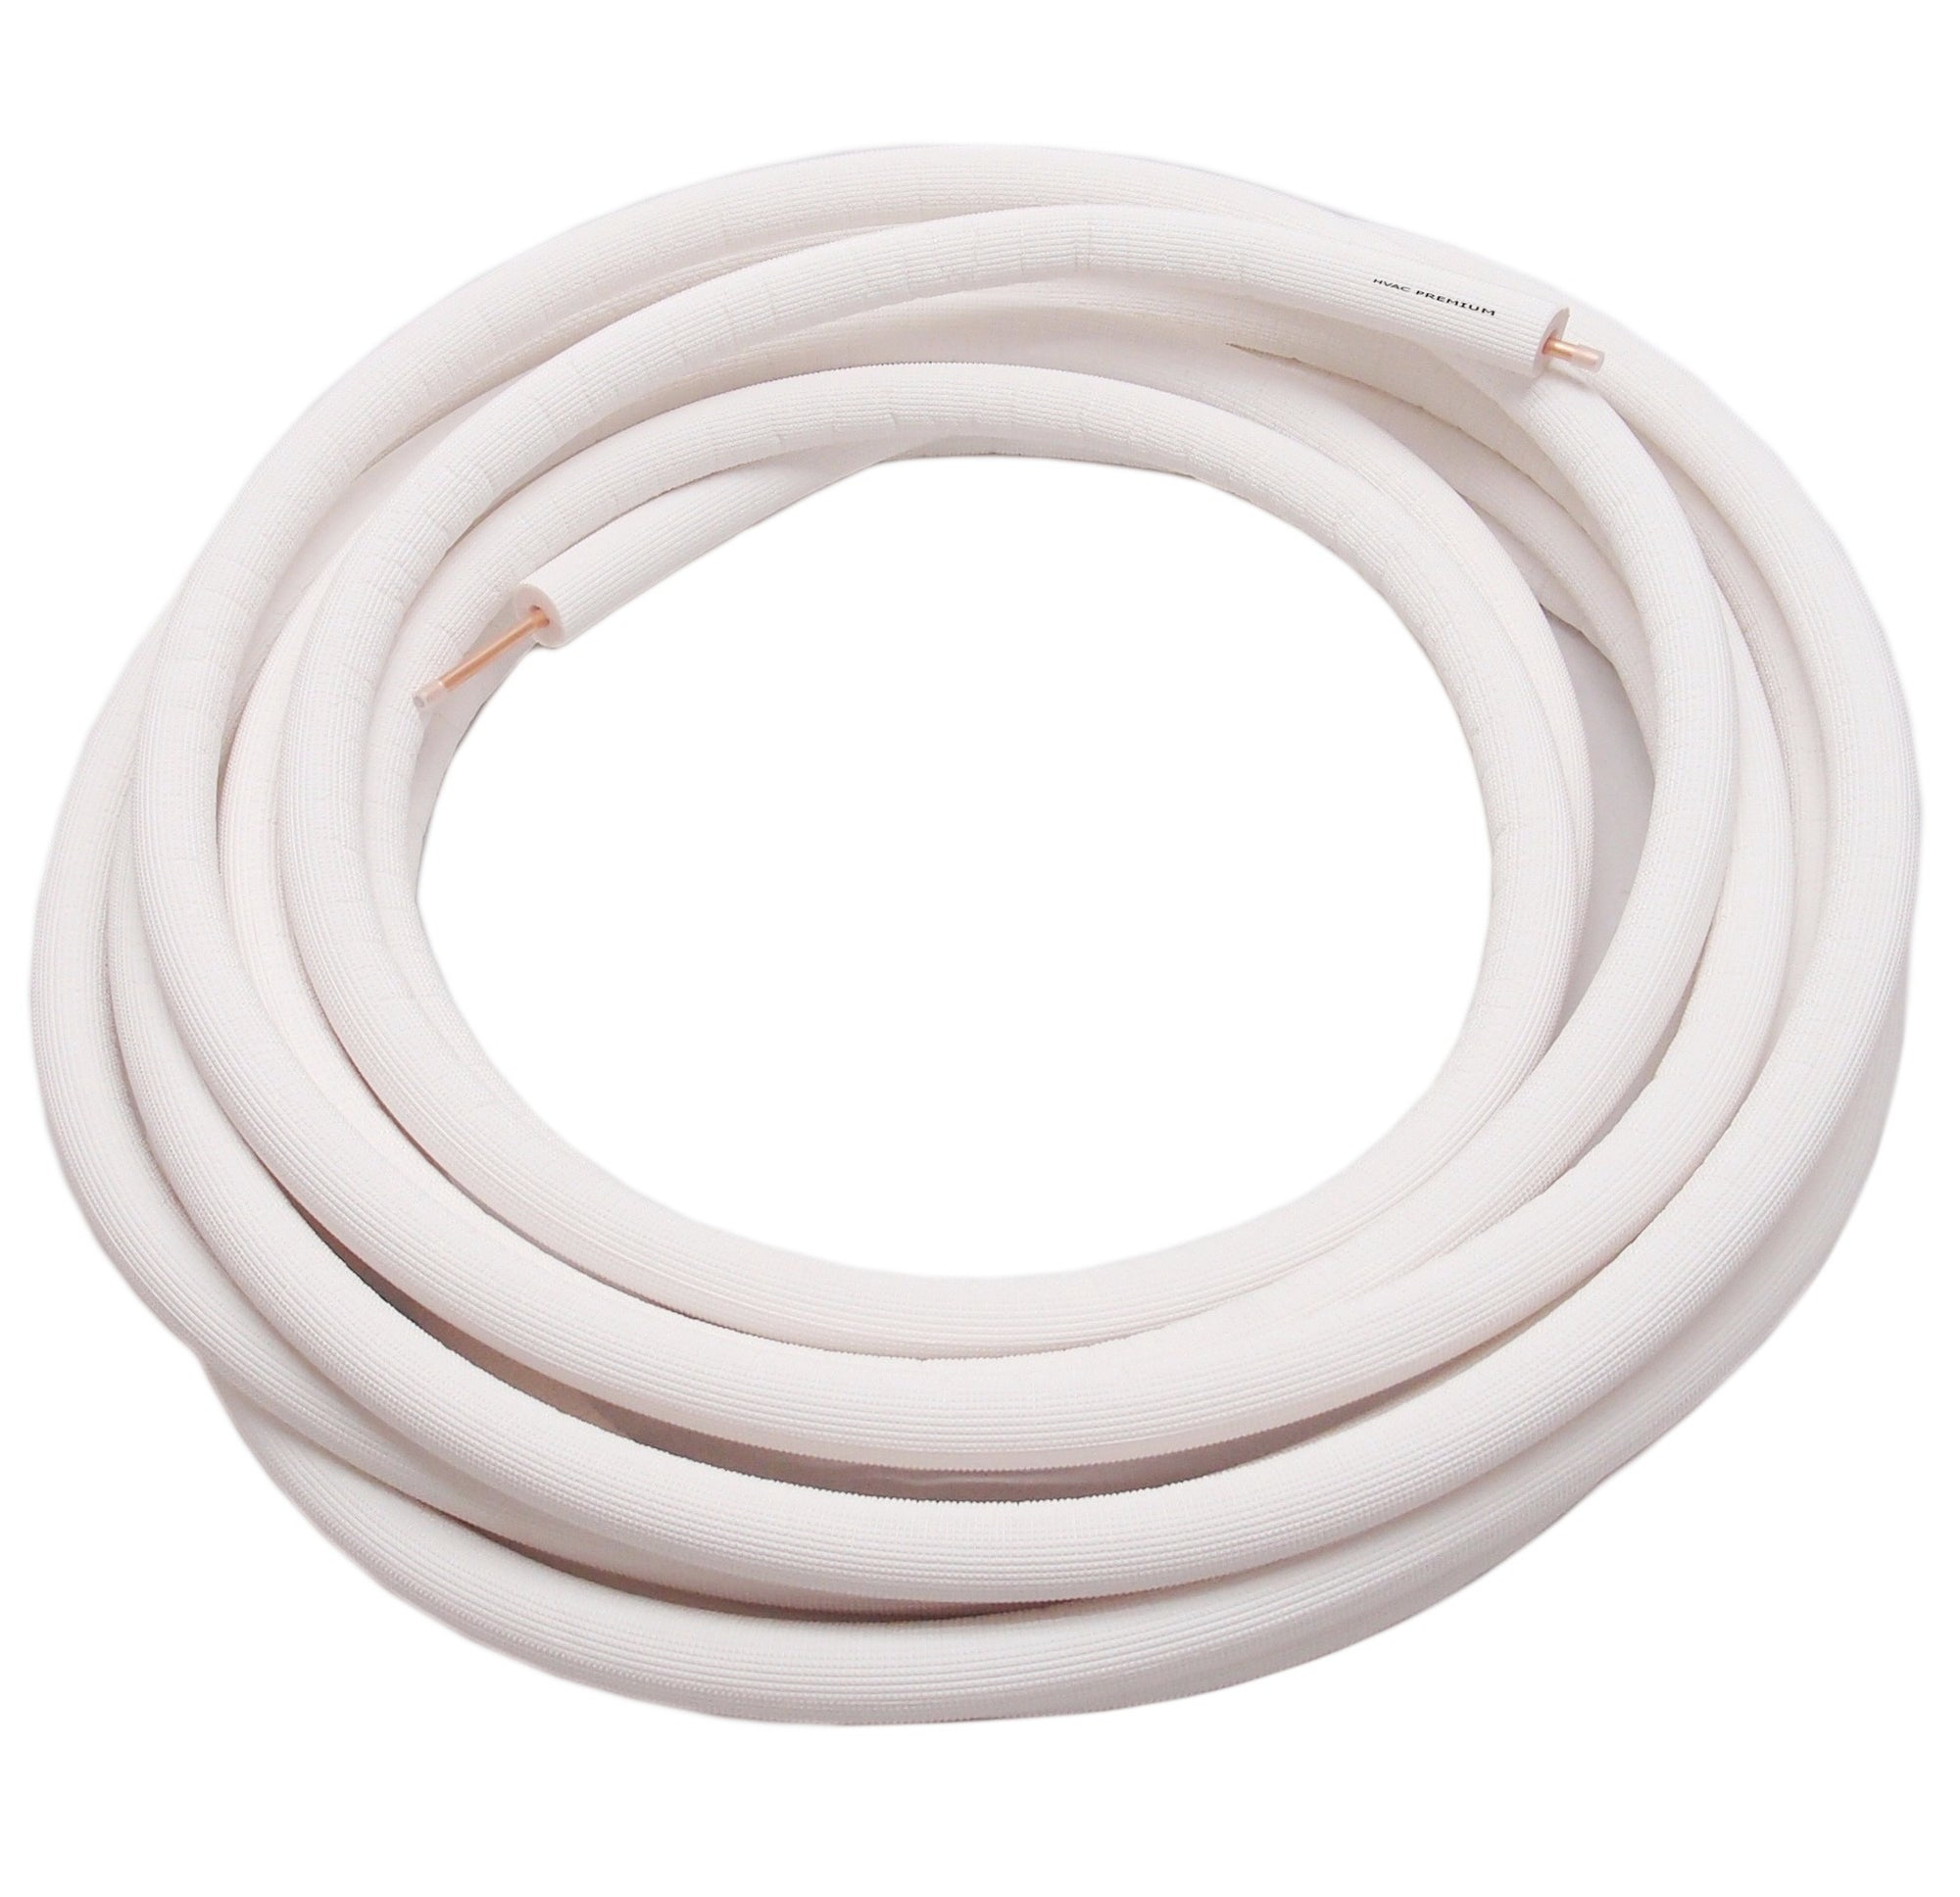 1/4" Insulated Copper Coil Line - Seamless Pipe Tube for HVAC, Refrigerant - 1/2" White Insulation - 50' Long